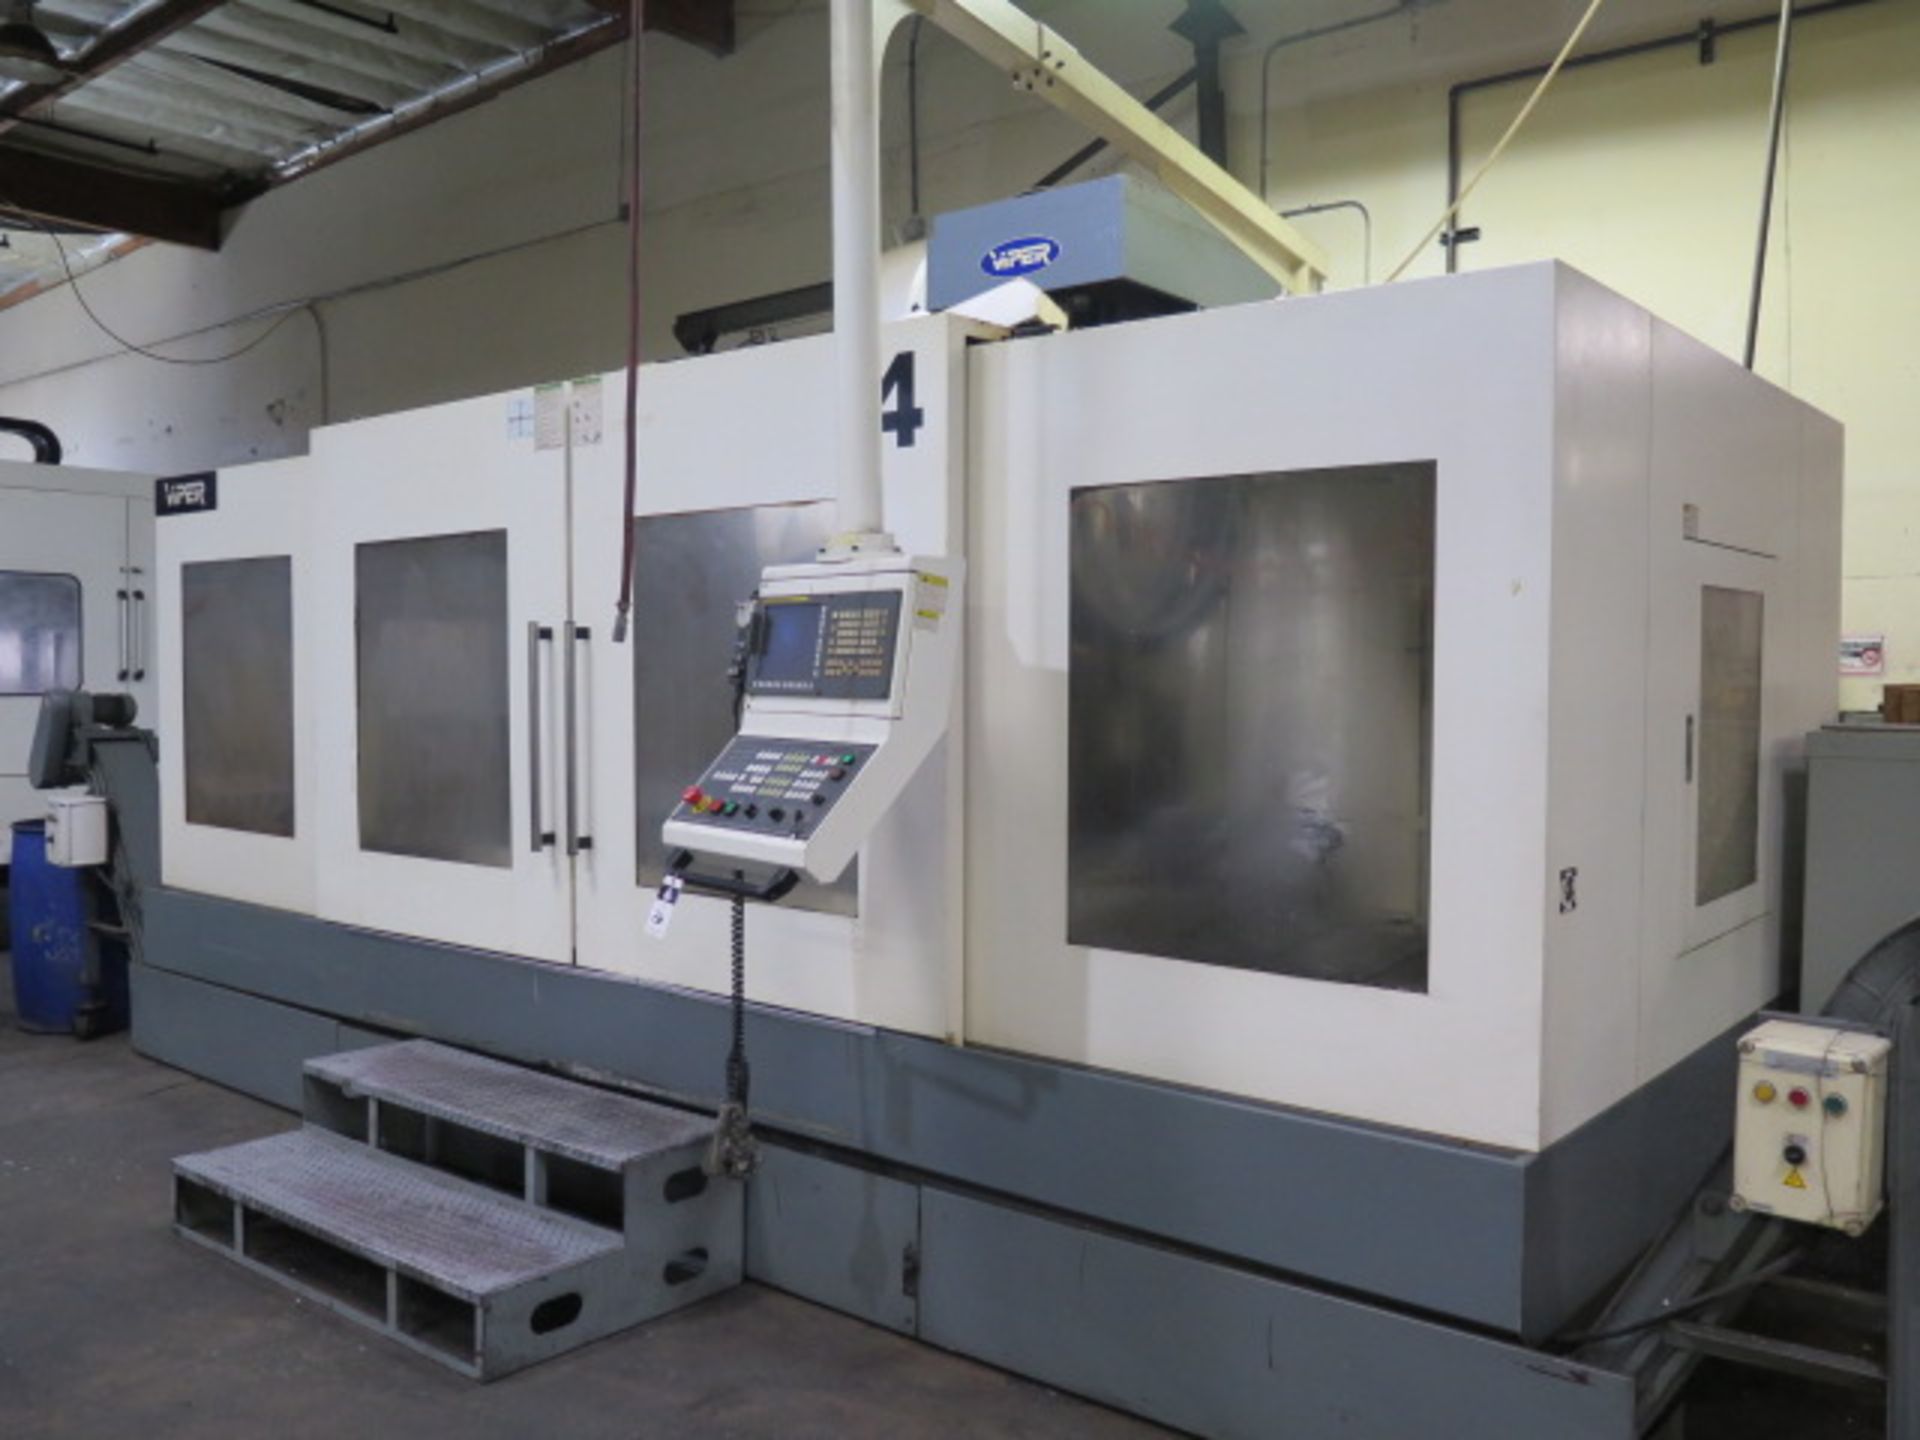 2010 Mighty Viper VMC-2100 5AB True 5-Axis CNC VMC, s/n 011795 w/ Fanuc 30i MODEL A, SOLD AS IS - Image 3 of 26